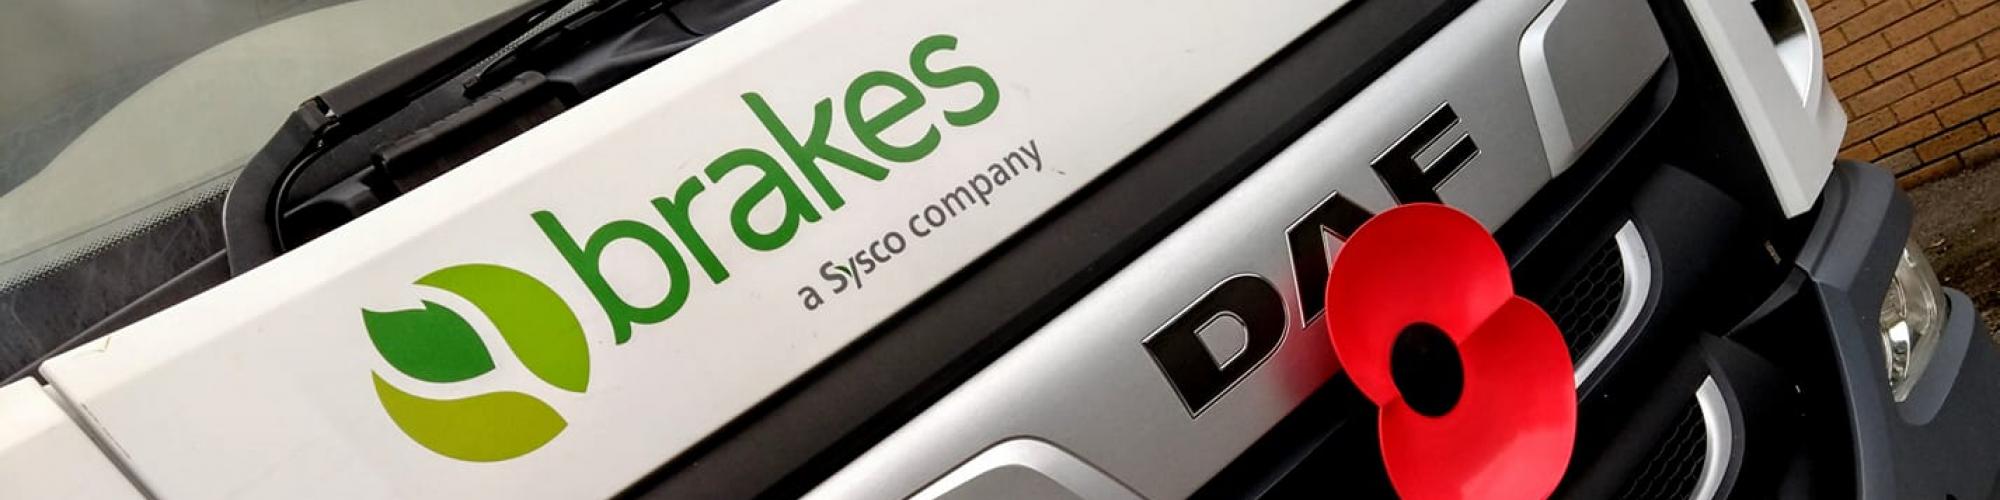 Brakes cover image